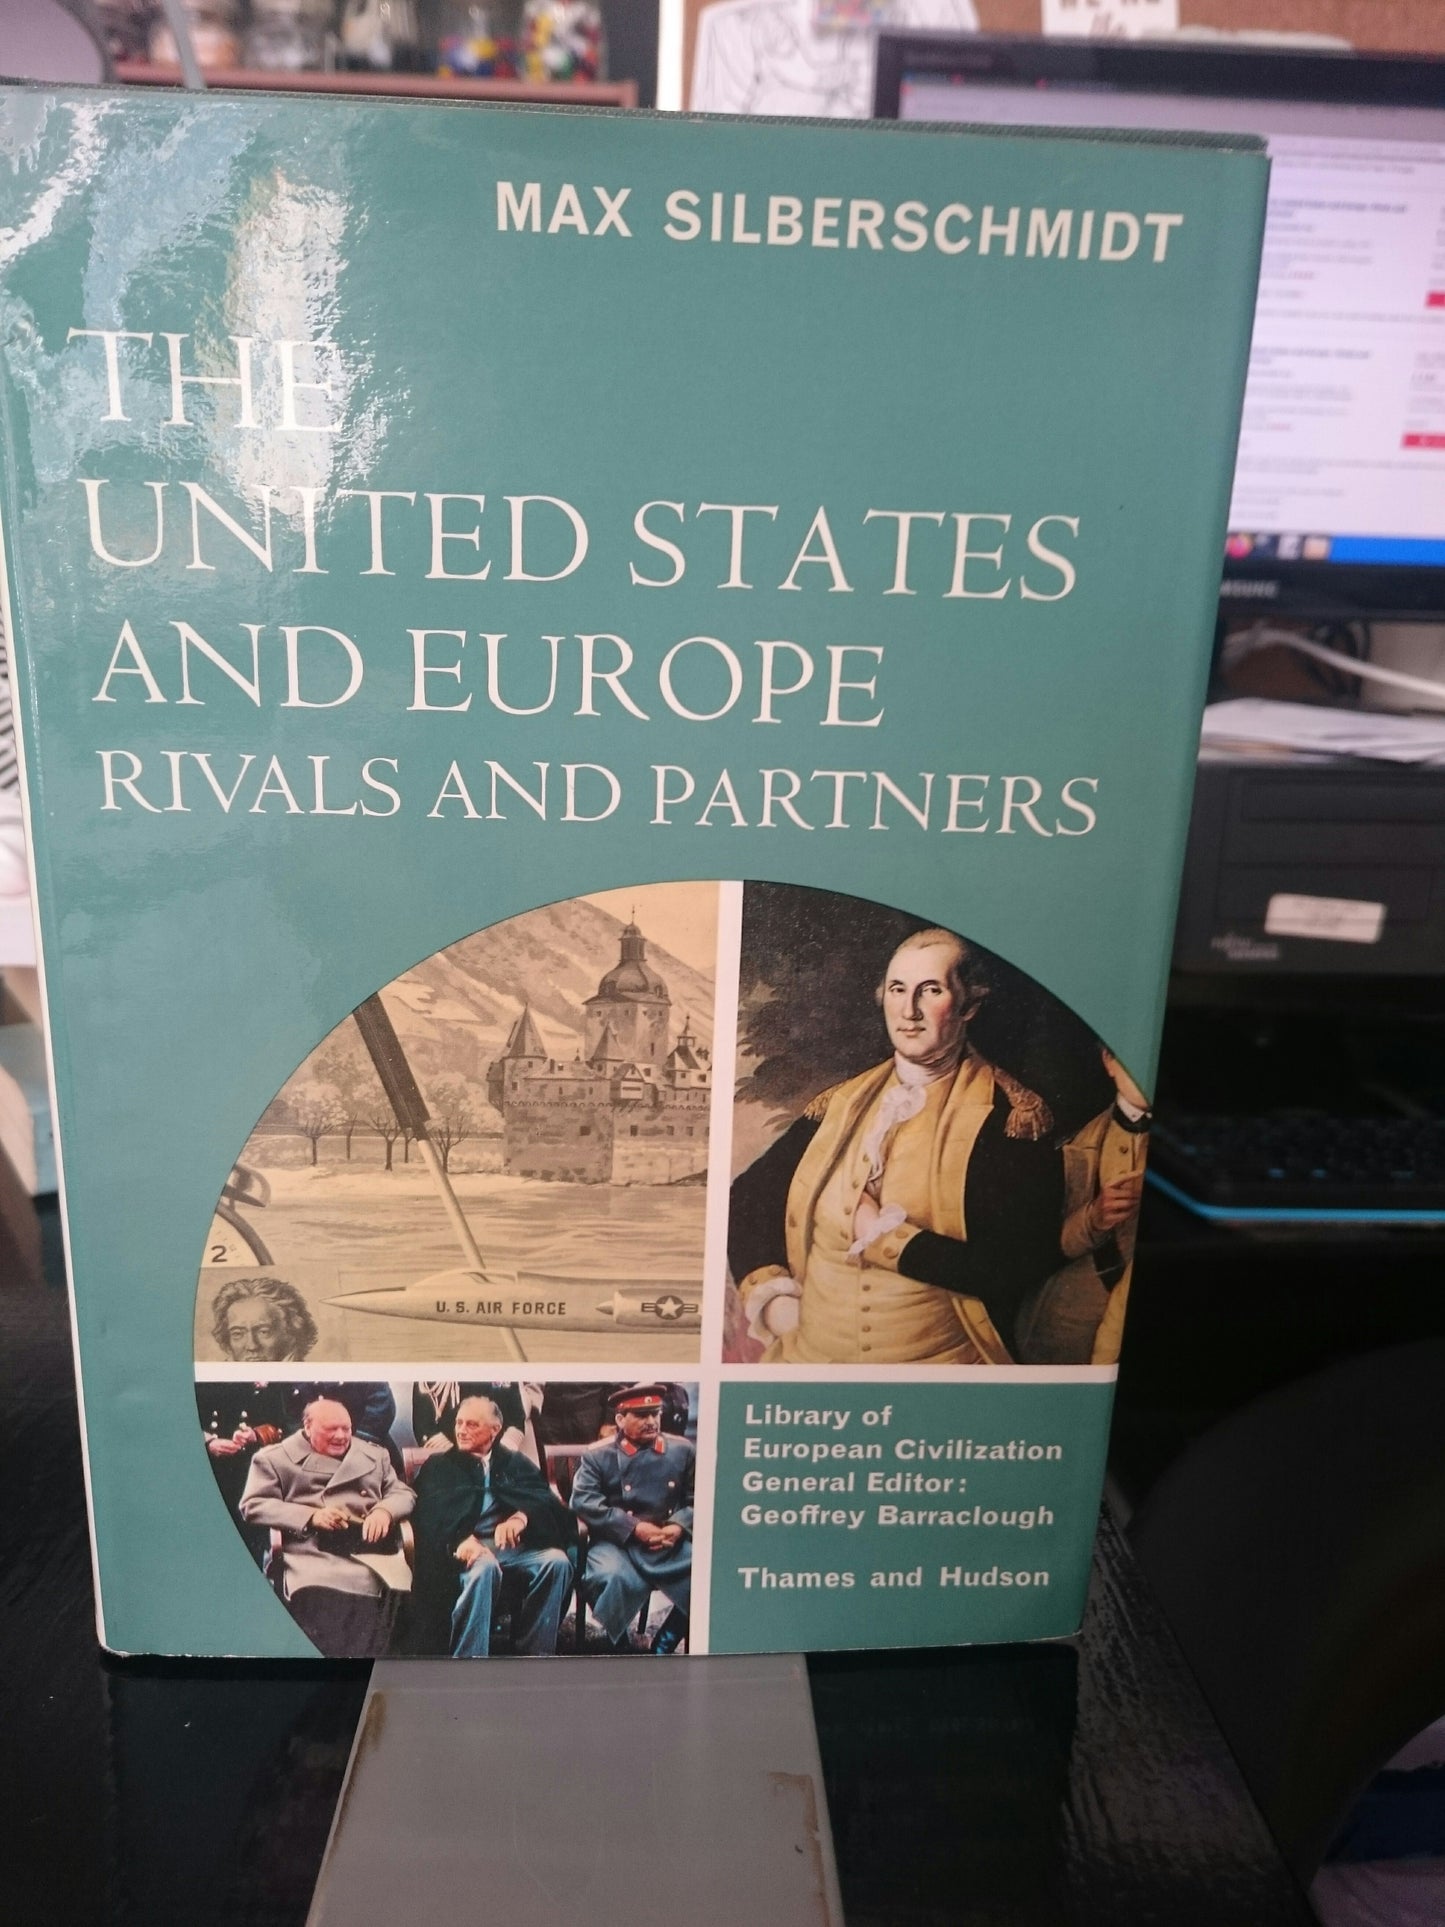 The United States and Europe: Rivals and Partners